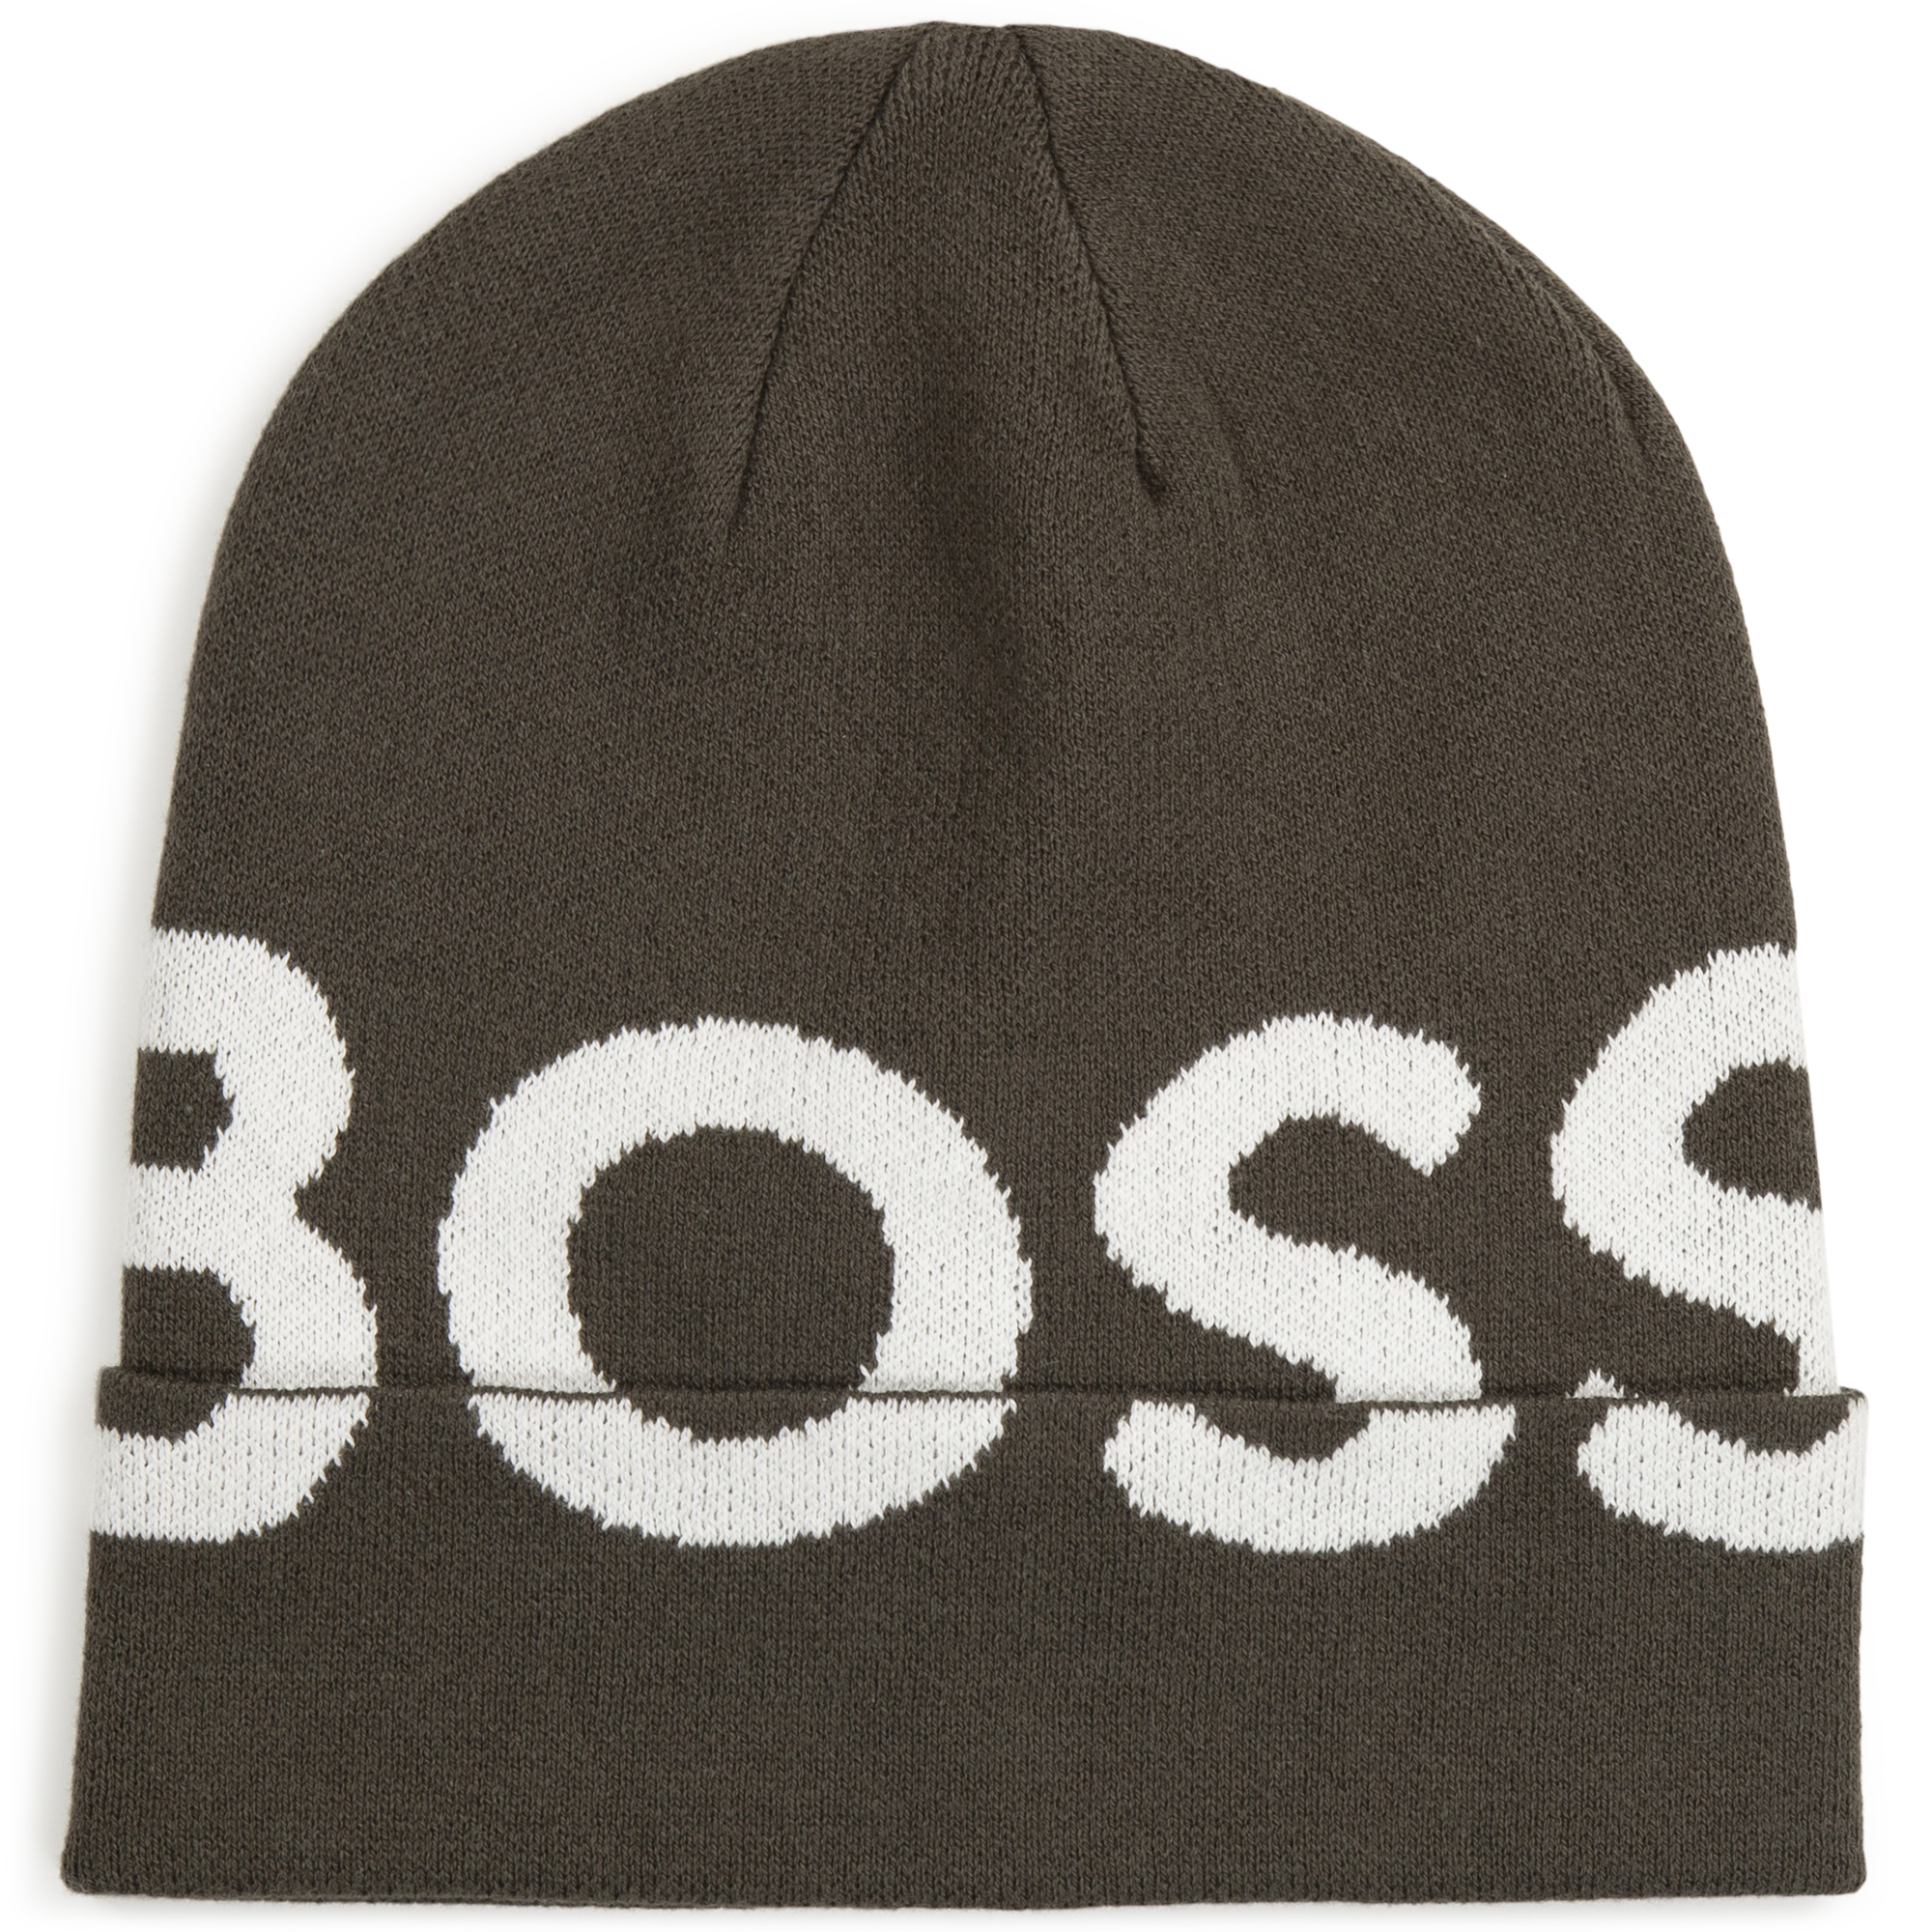 Knitted cotton hat BOSS for BOY